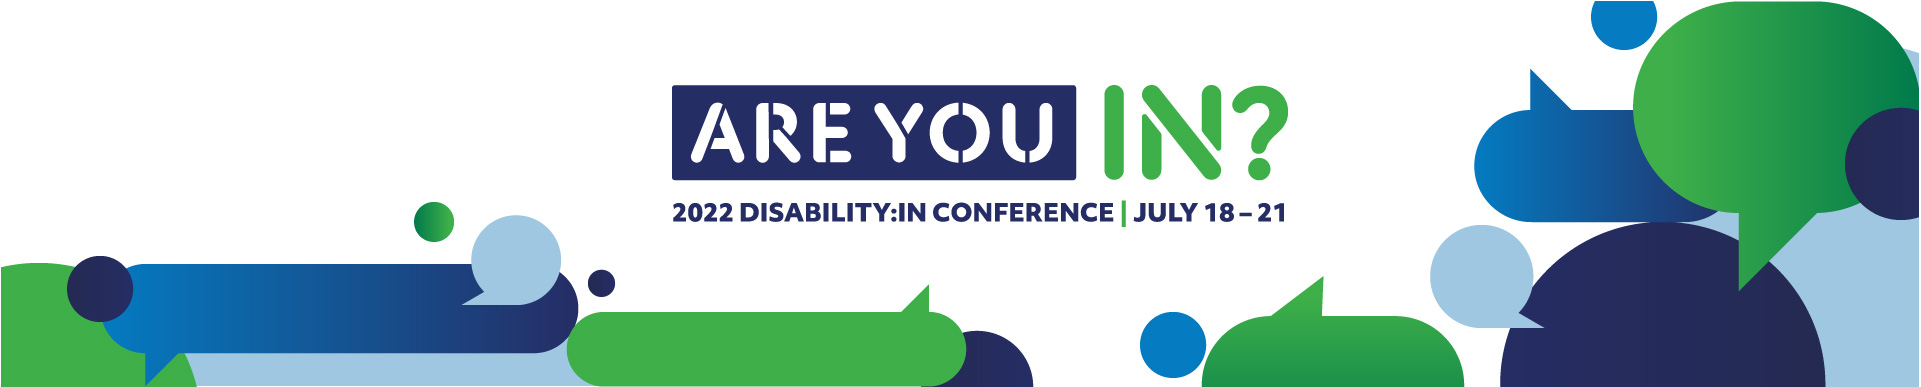 Are you in? 2022 Disability:IN conference July 18-21, 2022